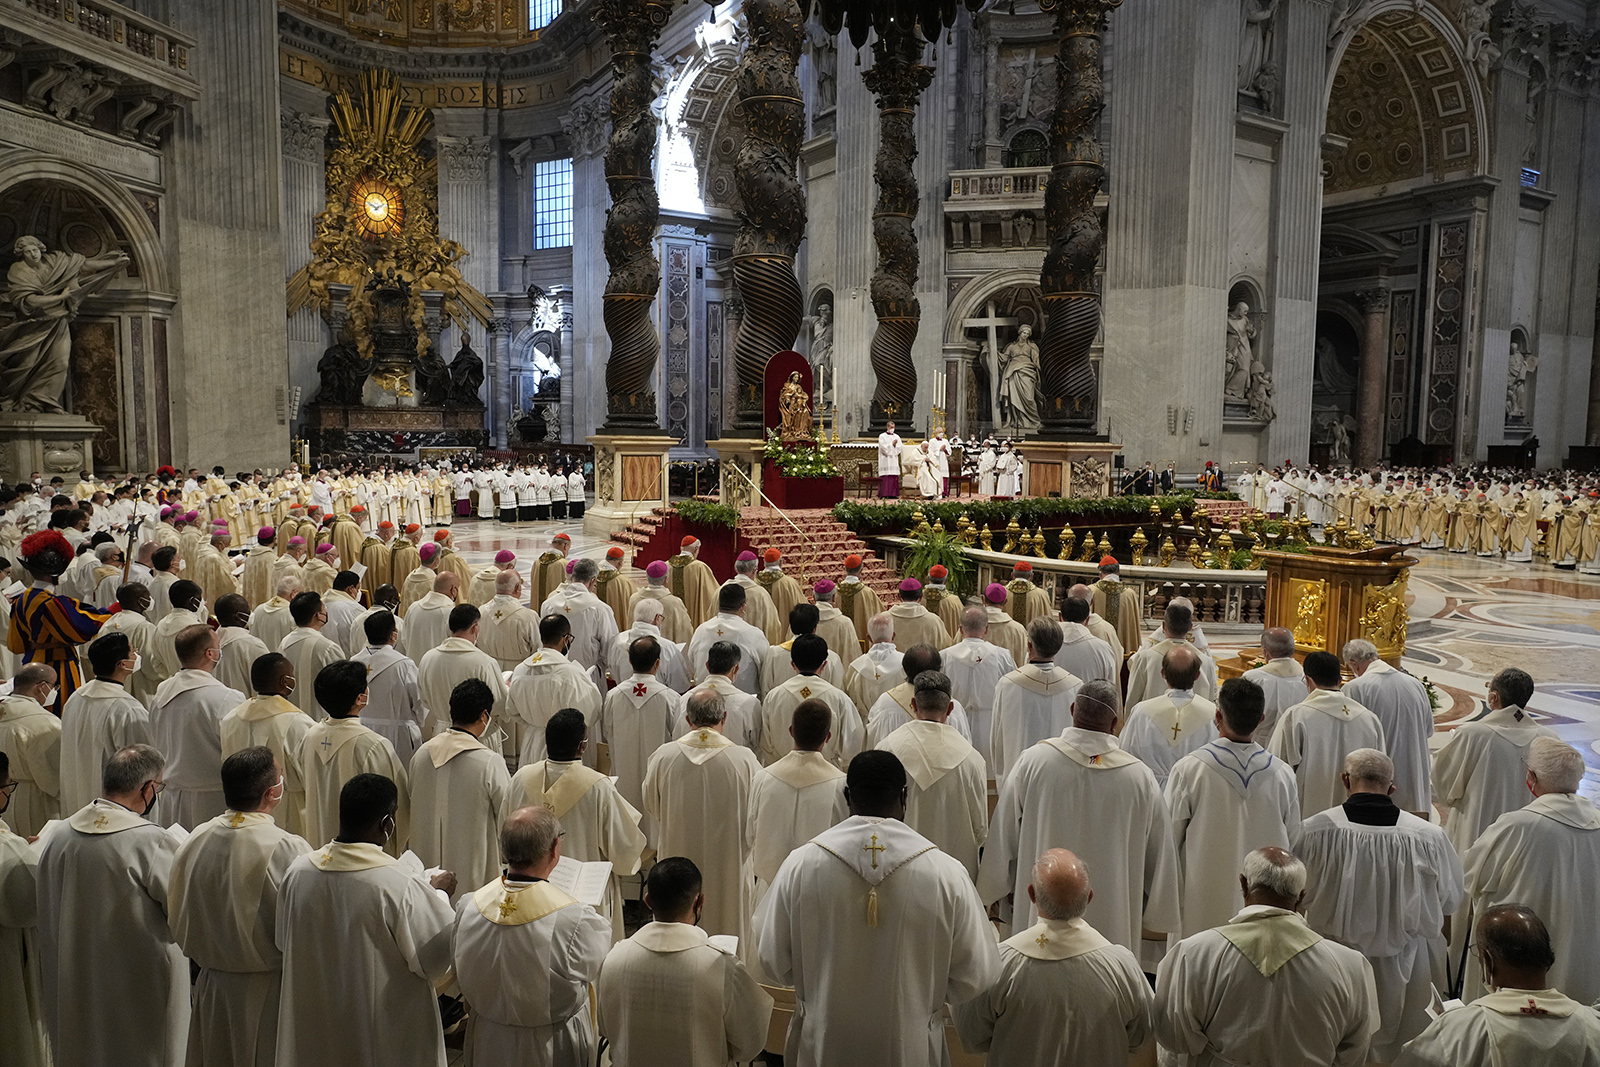 Pope Francis presides over a Chrism Mass inside St. Peter's Basilica, at the Vatican, Thursday, April 14, 2022. During the Mass the Pontiff blesses a token amount of oil that will be used to administer the sacraments for the year. (AP Photo/Gregorio Borgia)